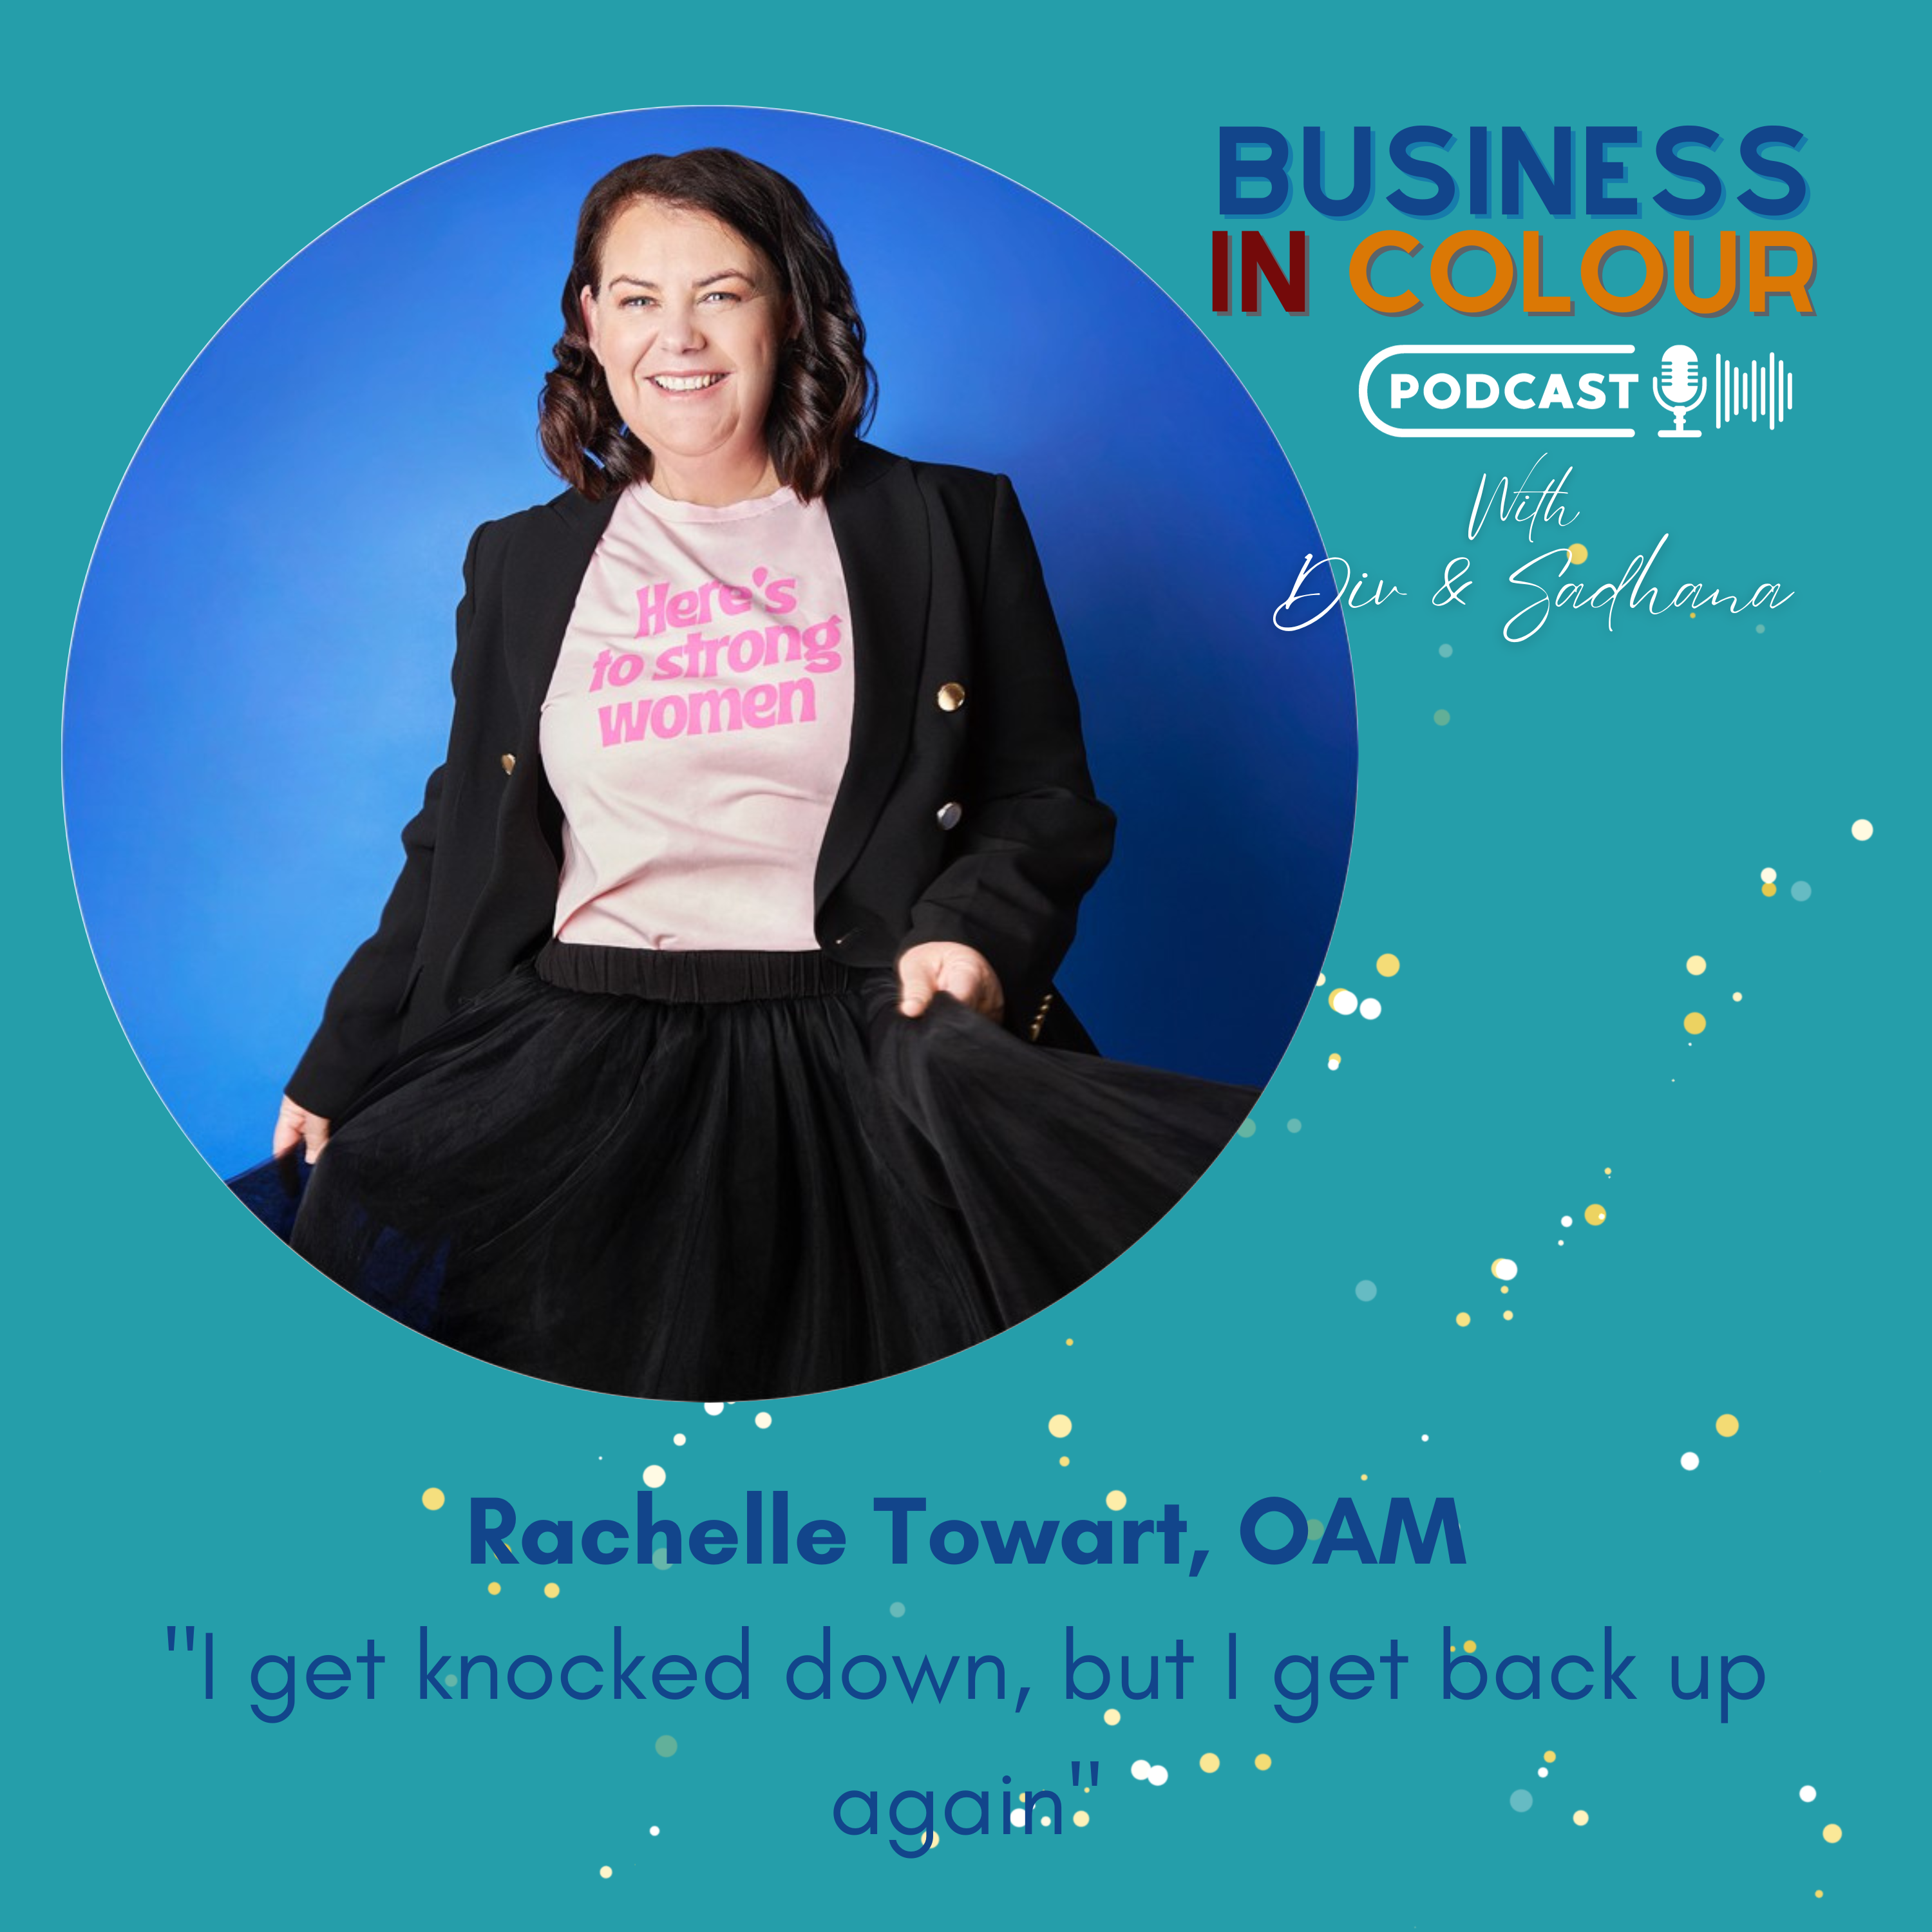 EP 101 "I get knocked down but I get back up again" - YES/Rachelle Towart